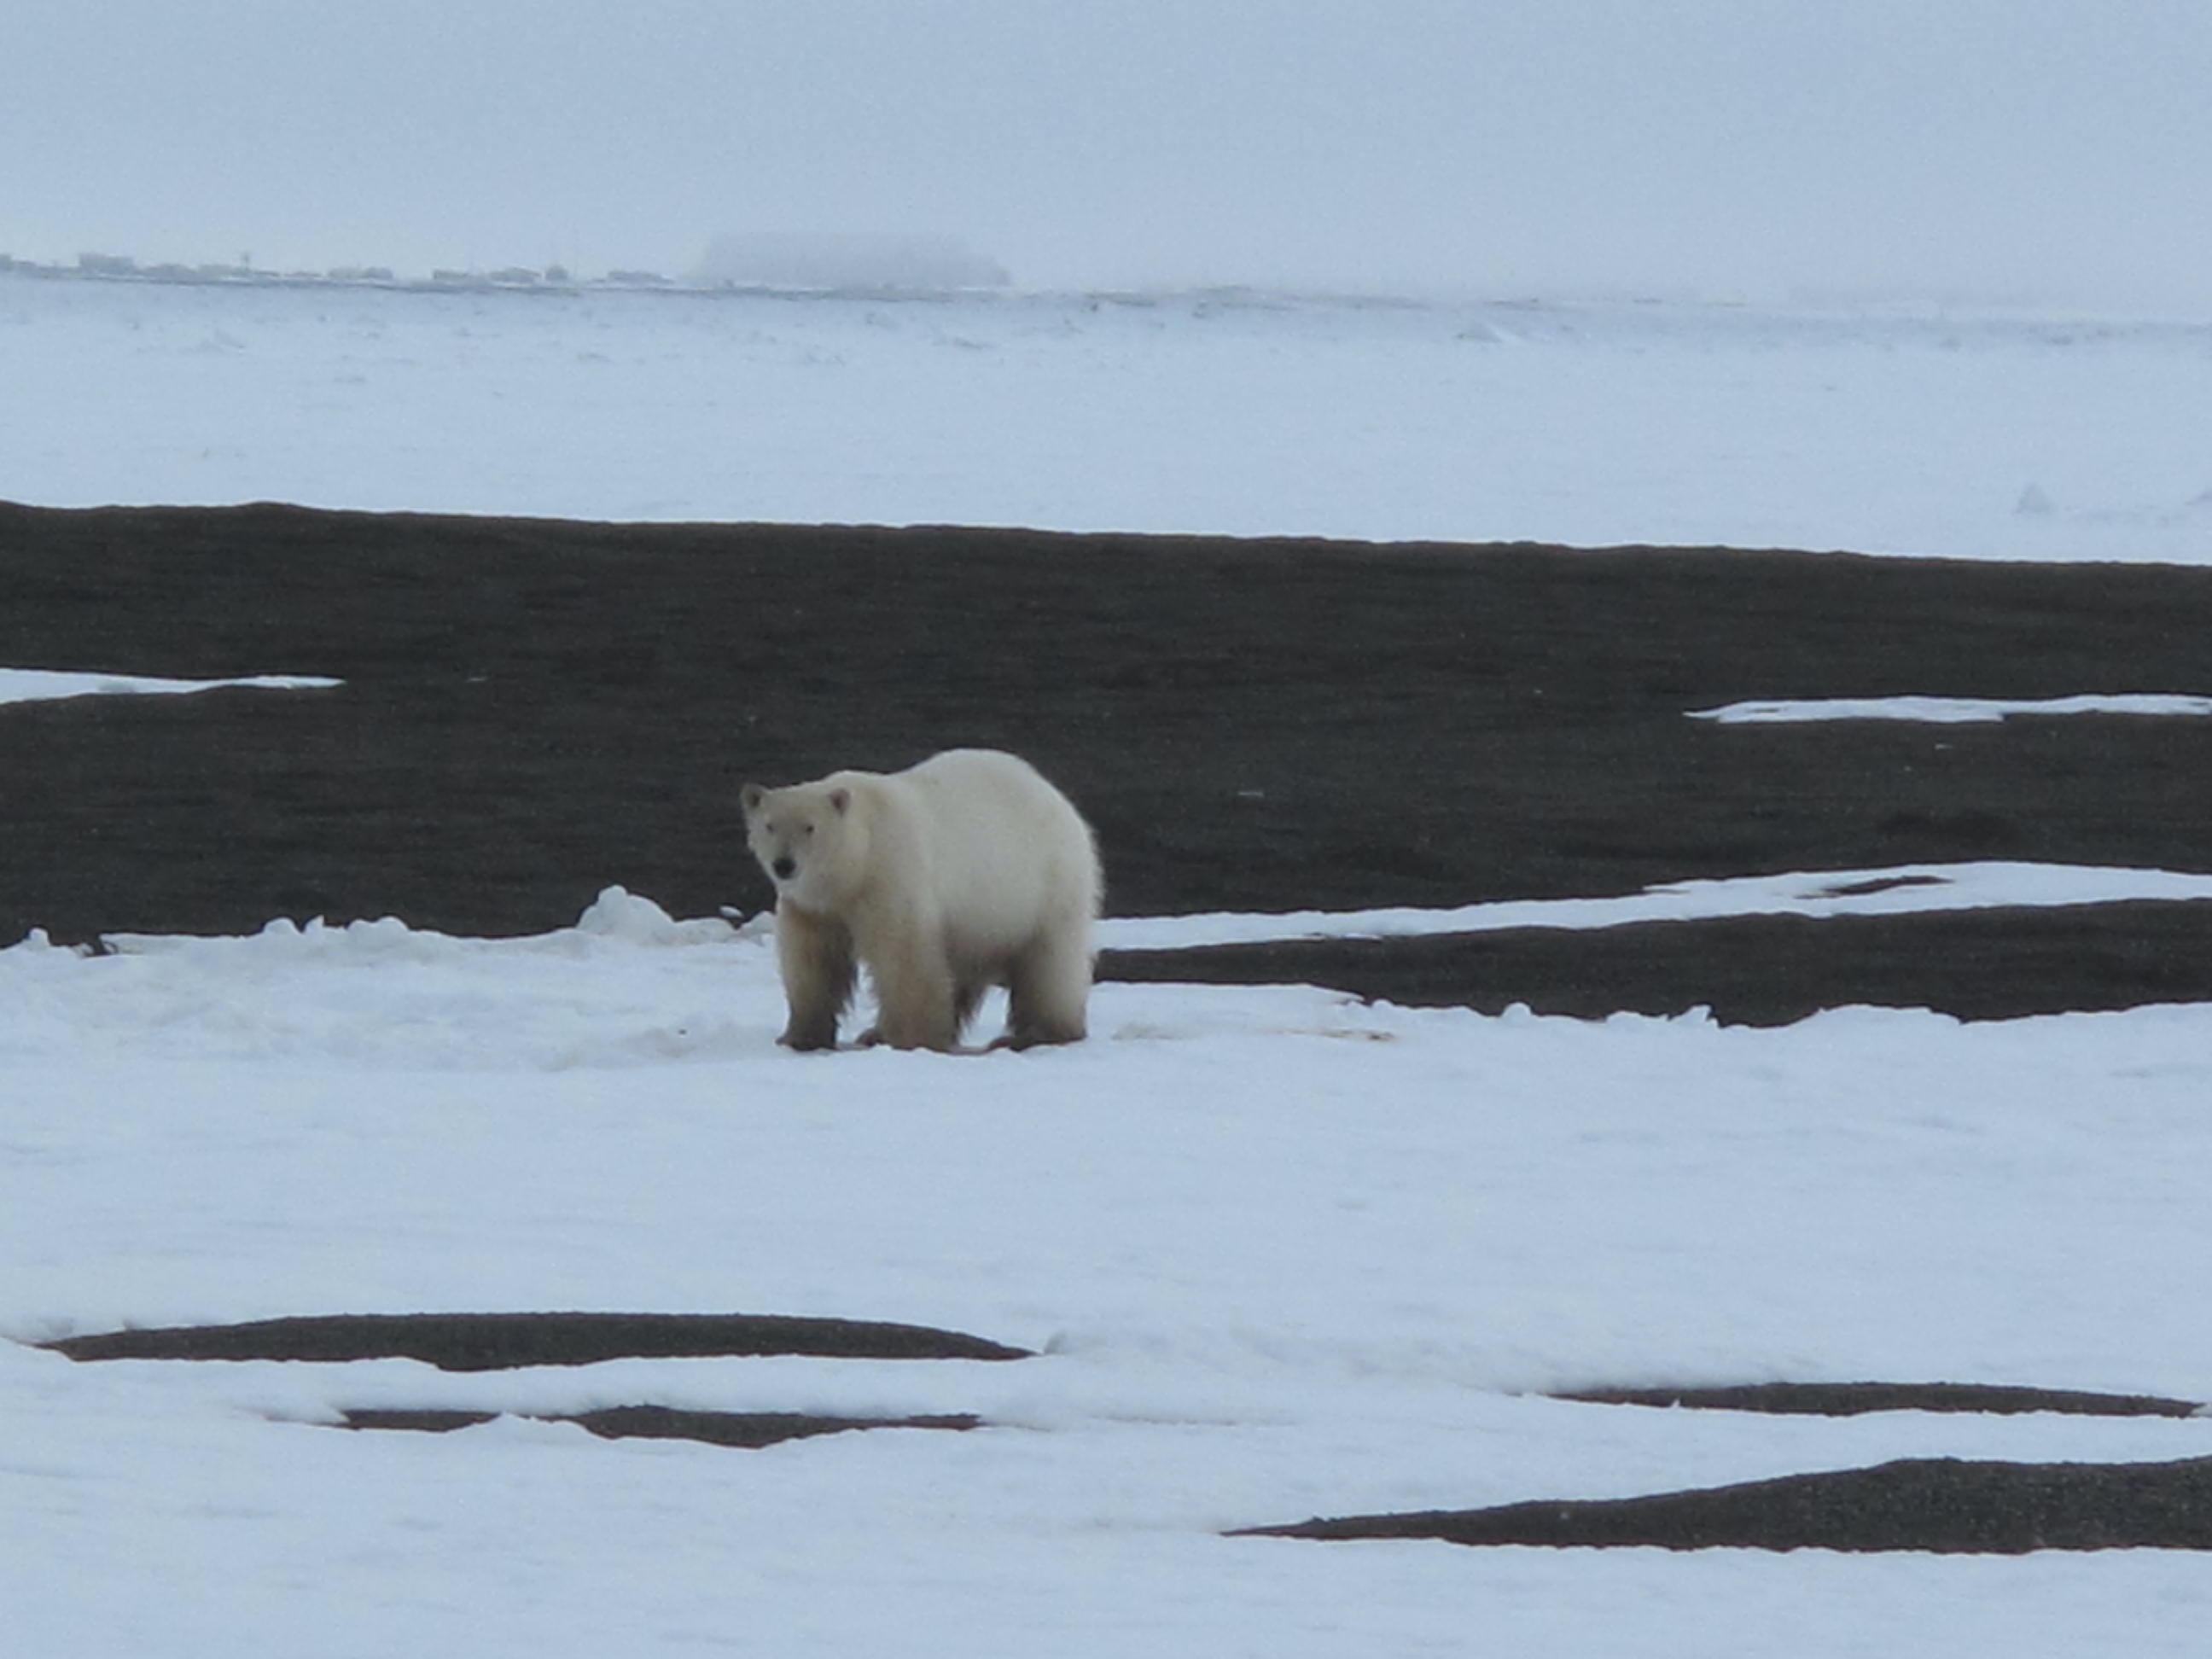 A polar bear walks across a patch of snow on a graveled area. Snow covers the landscape beyond the gravel, and a few buildings sit on the horizon.